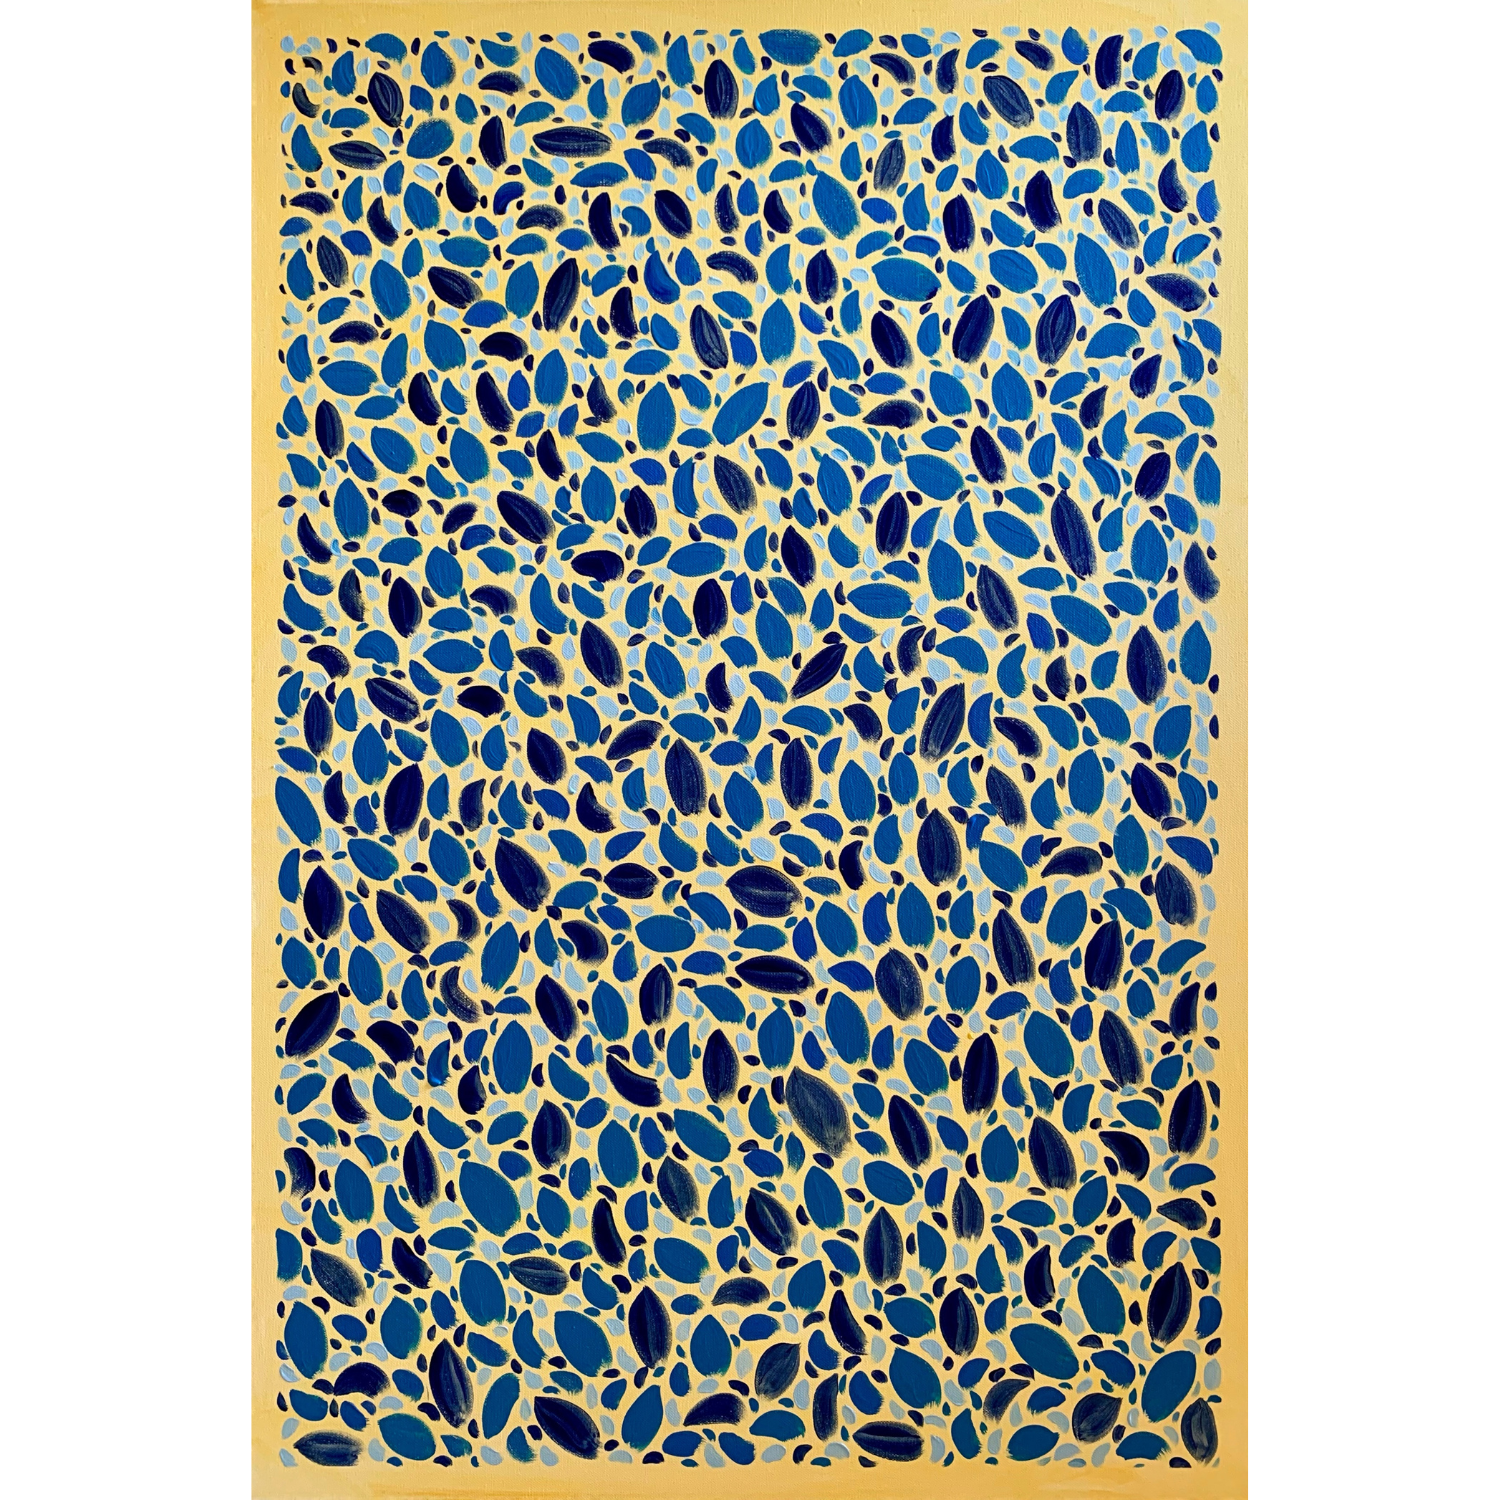 Blue with Yellow ornament, 2022, Acrylic on canvas, 90*60 cm